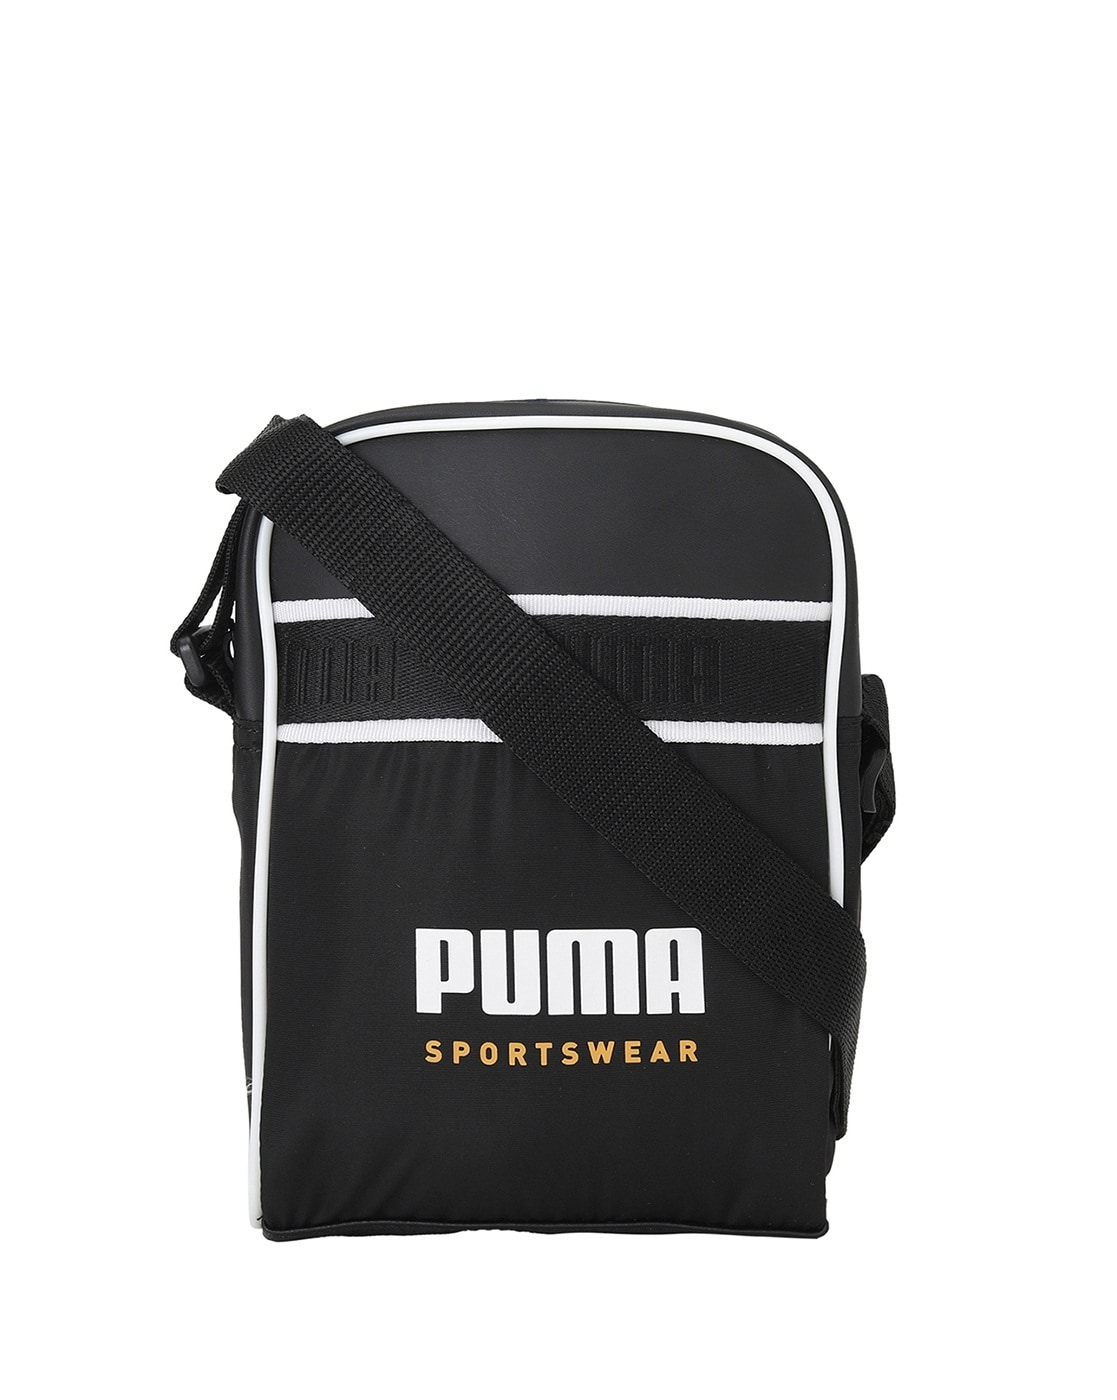 Puma Bags  Get 60 Off on Puma Bags for Men  Women in India  Myntra